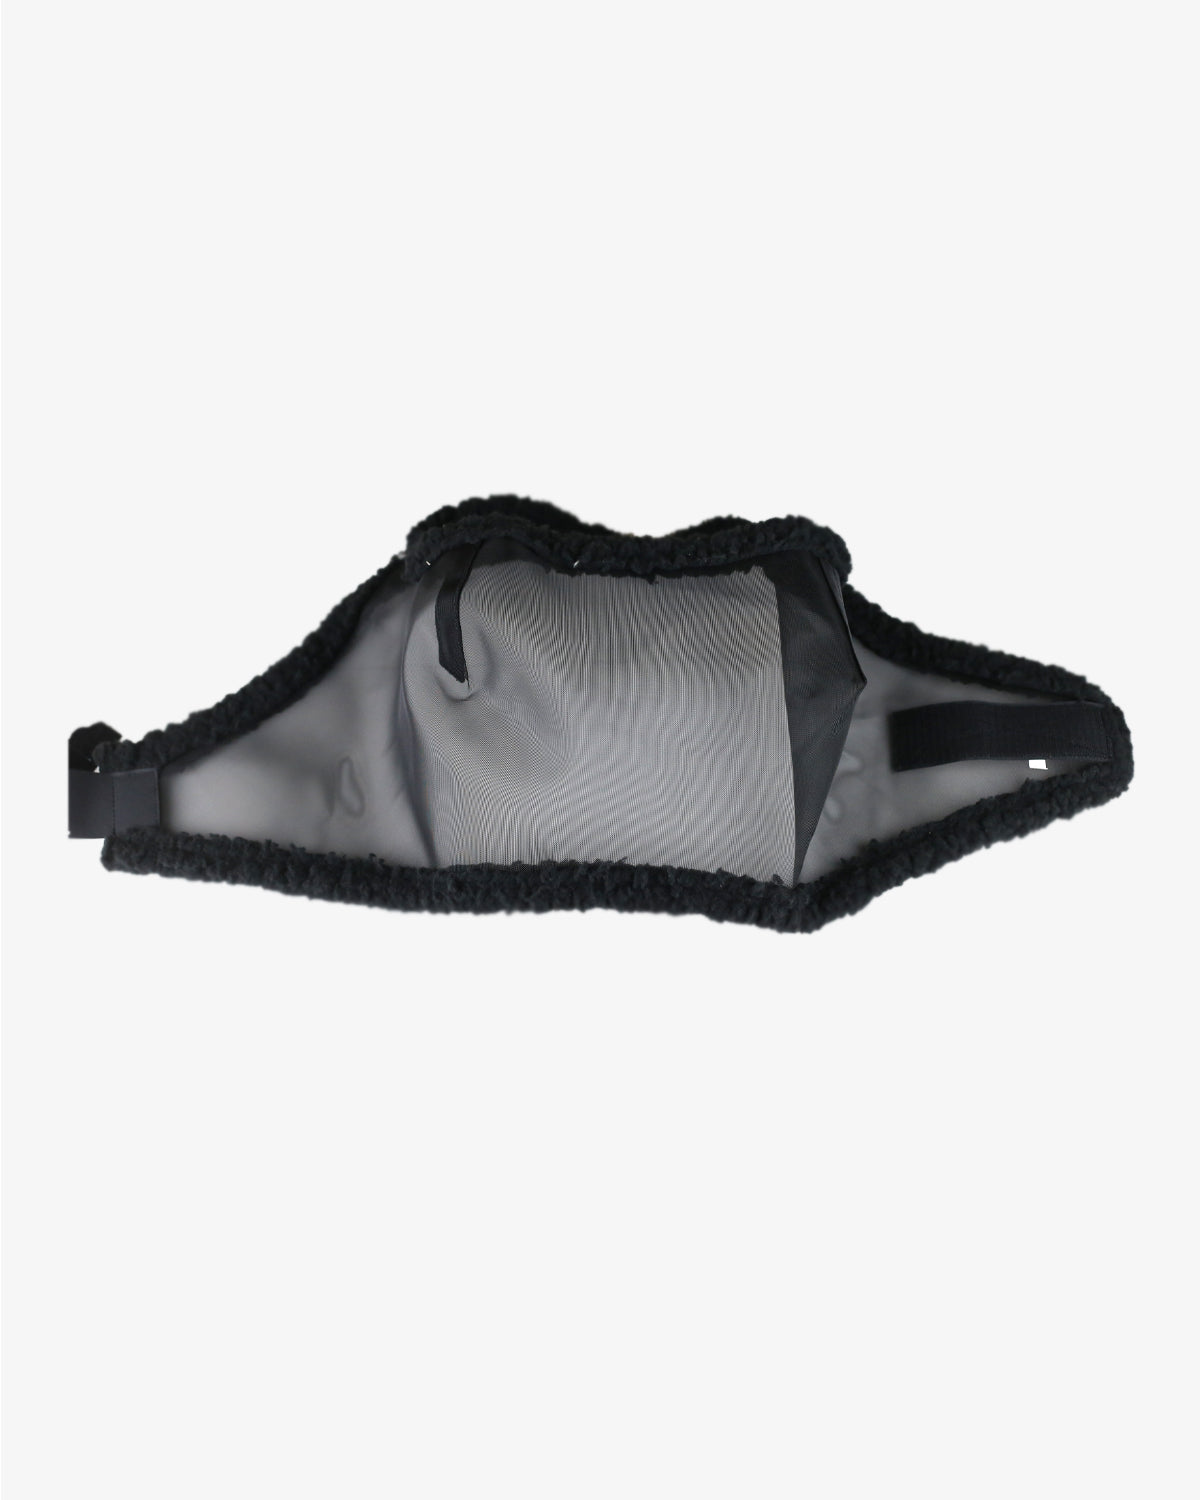 Mesh Fly Mask without Ear Cover